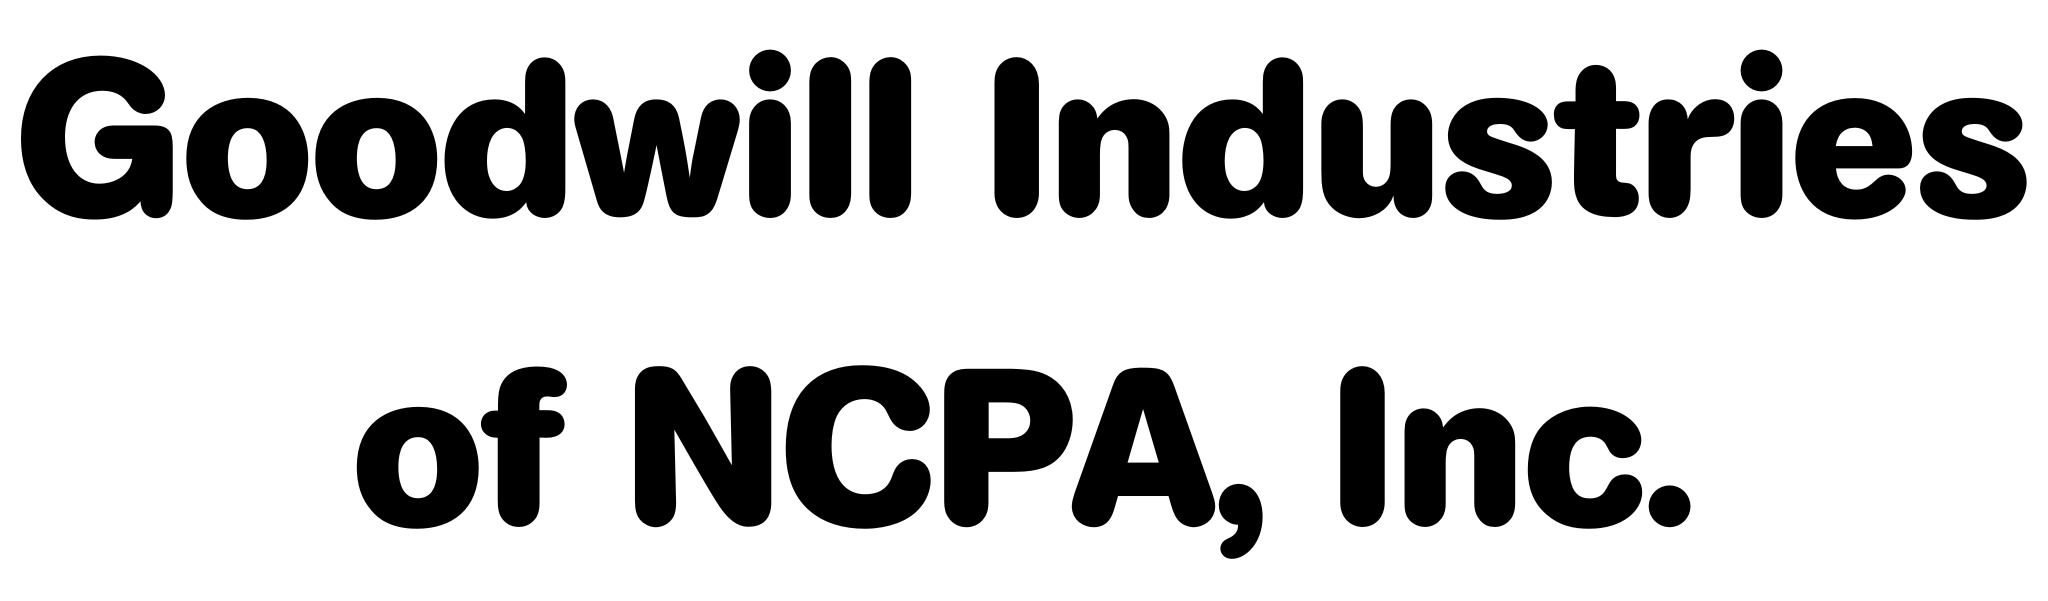 Goodwill Industries of NCPA, Inc. (Silver)